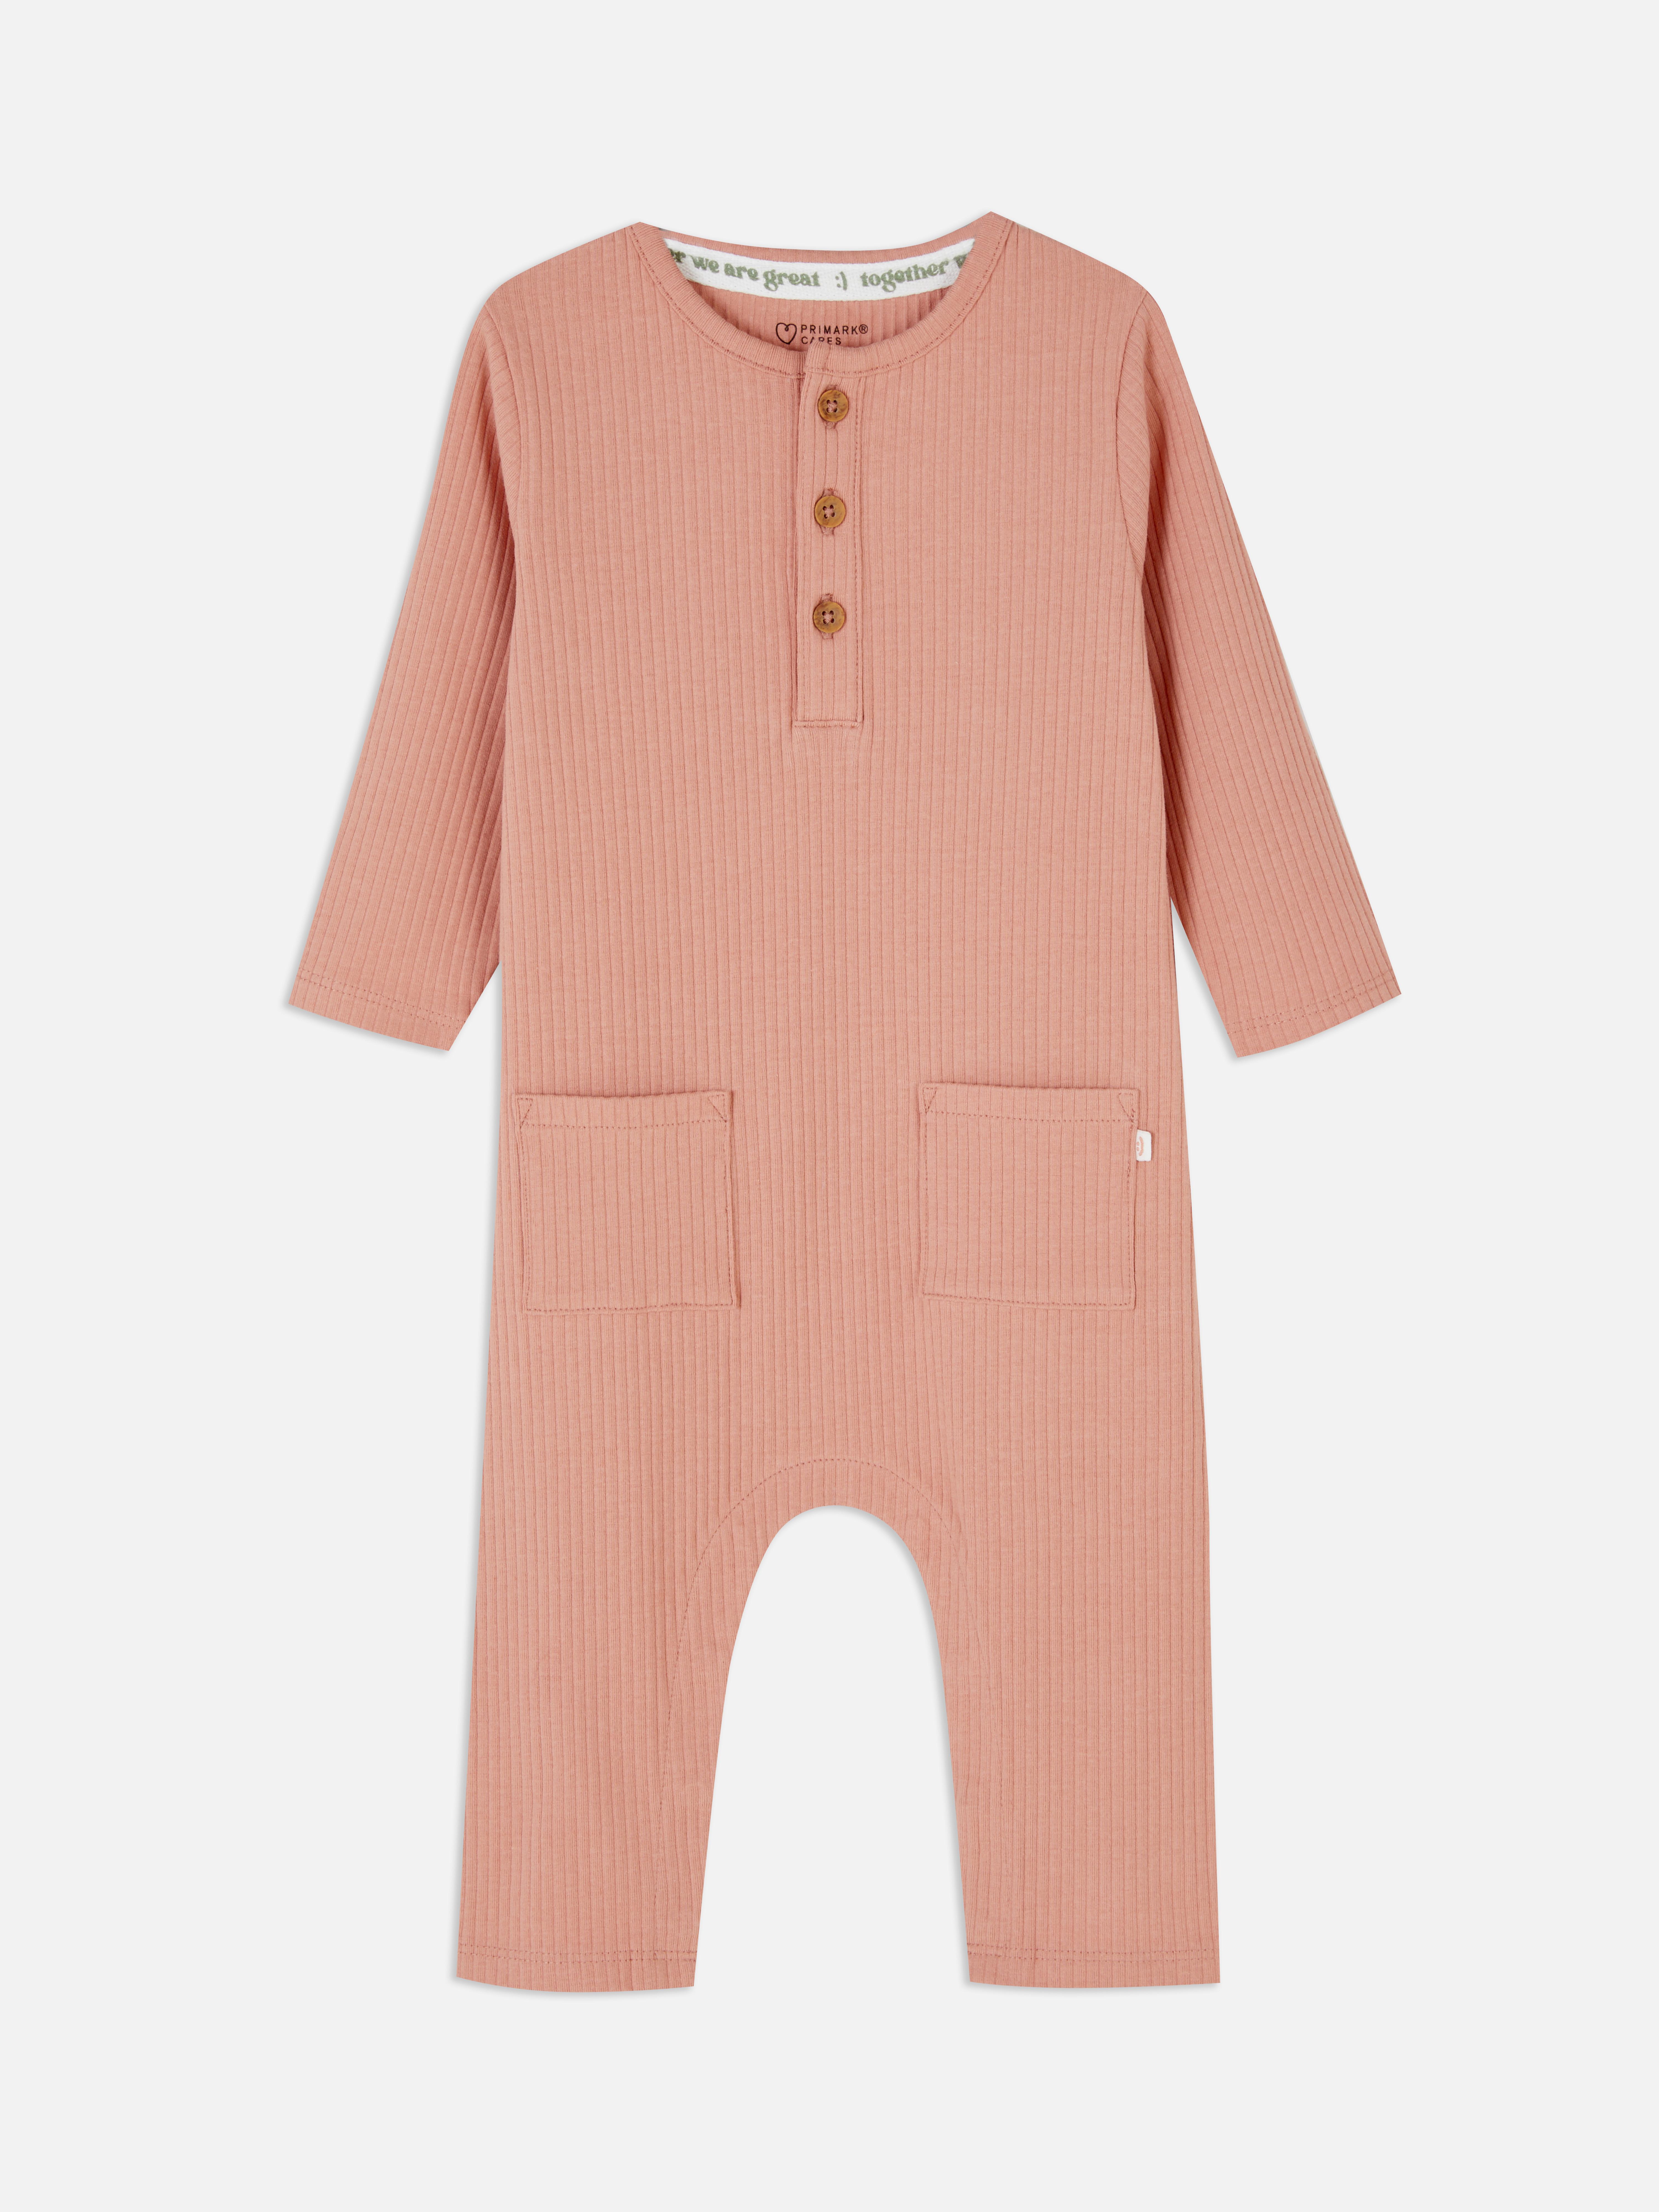 Stacey Solomon Ribbed Romper Suit